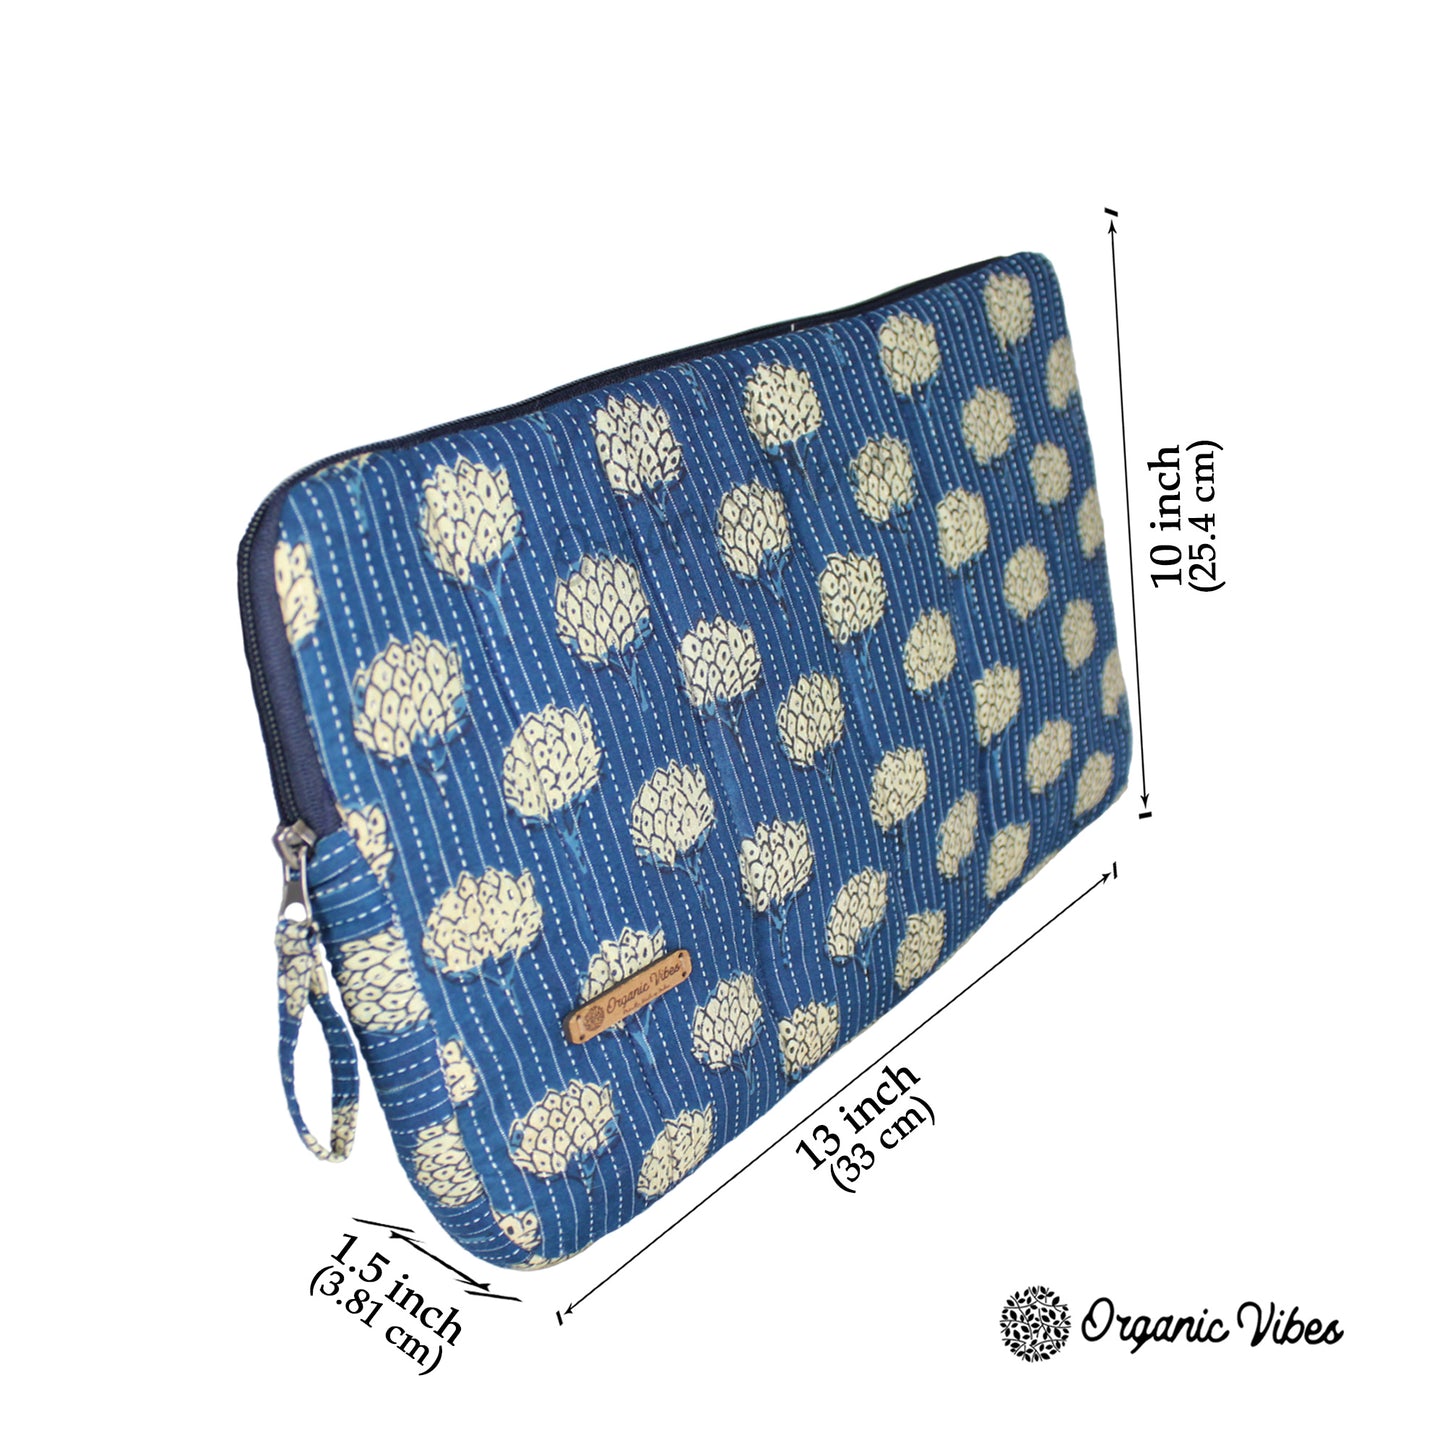 Organic Vibes Hand Block Blue Ikat Floral Printed Laptop Sleeves for 13 Inches Laptop